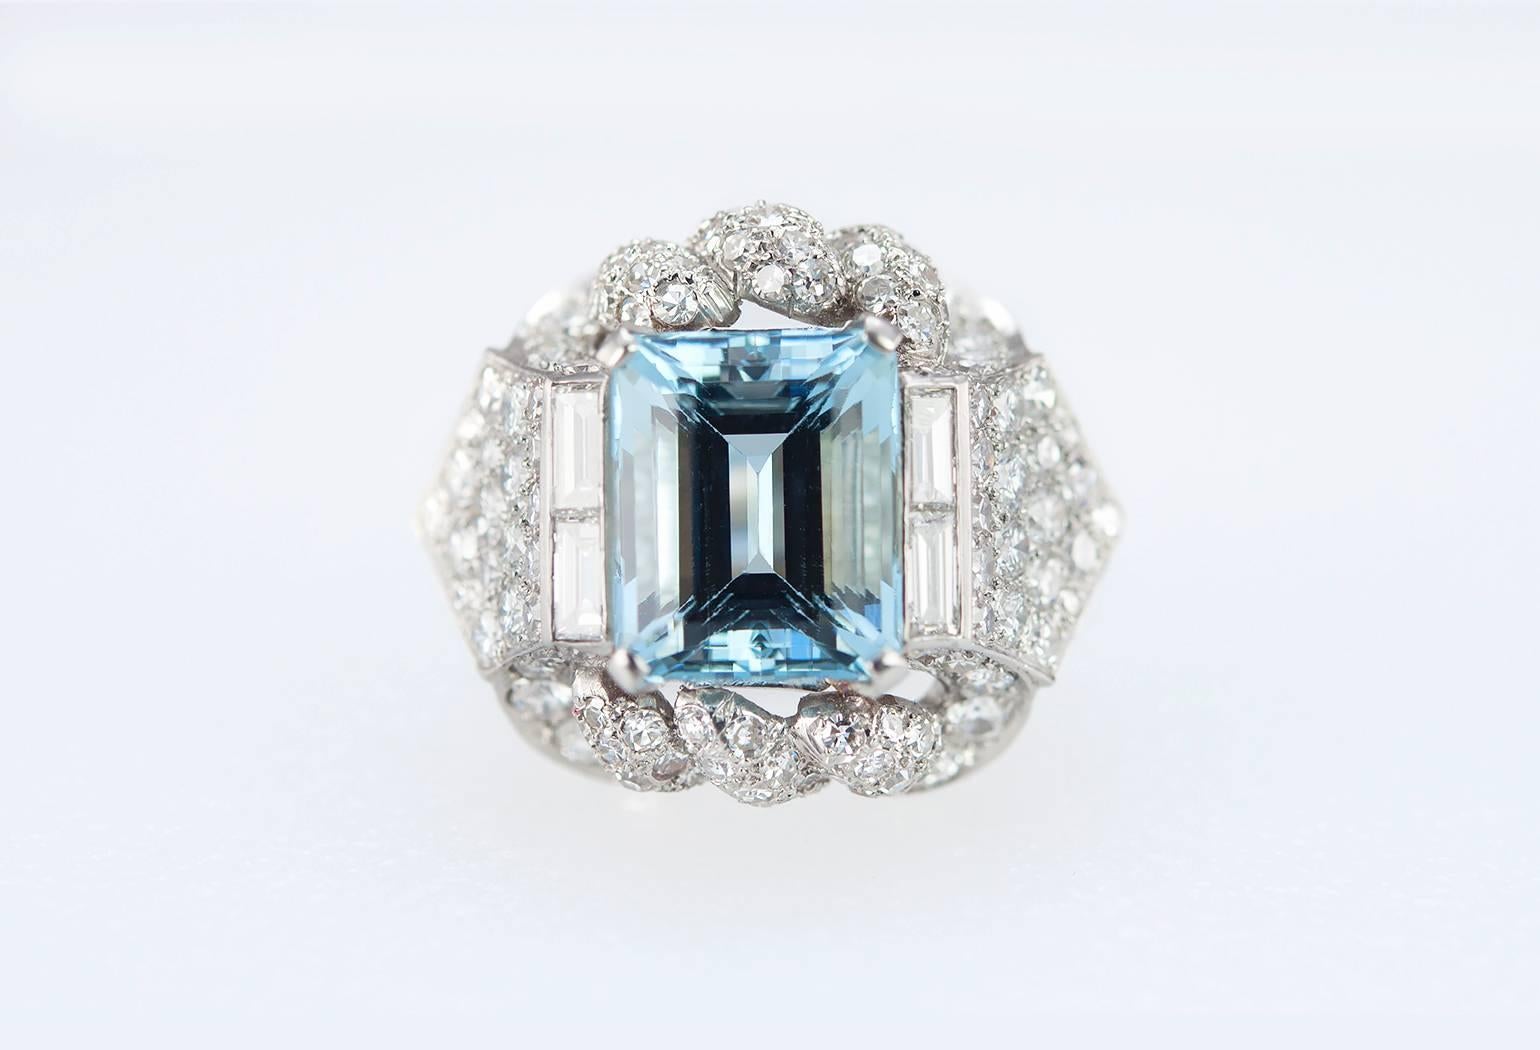 A beautiful 1960s platinum cocktail ring featuring a 5.45 carat aquamarine center surrounded by 4 baguette diamonds and an additional 128 round diamonds set throughout the mounting, approximately 3 carats in total diamond weight. The ring is